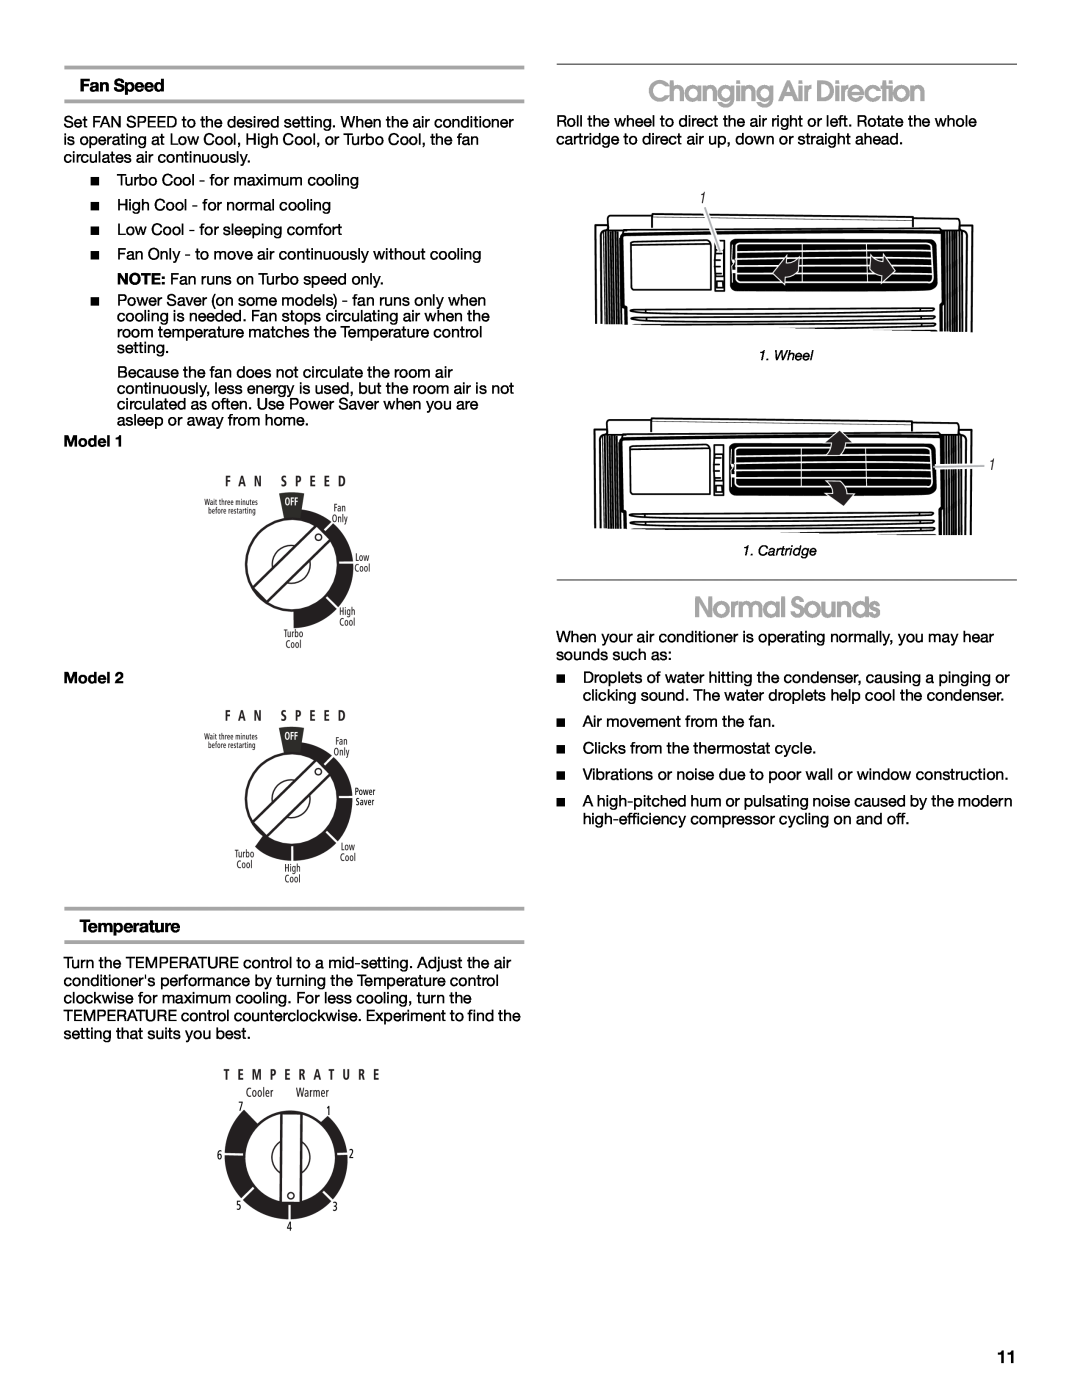 Whirlpool CA10WXP0 manual Changing Air Direction, Normal Sounds, Fan Speed, Temperature, Model 